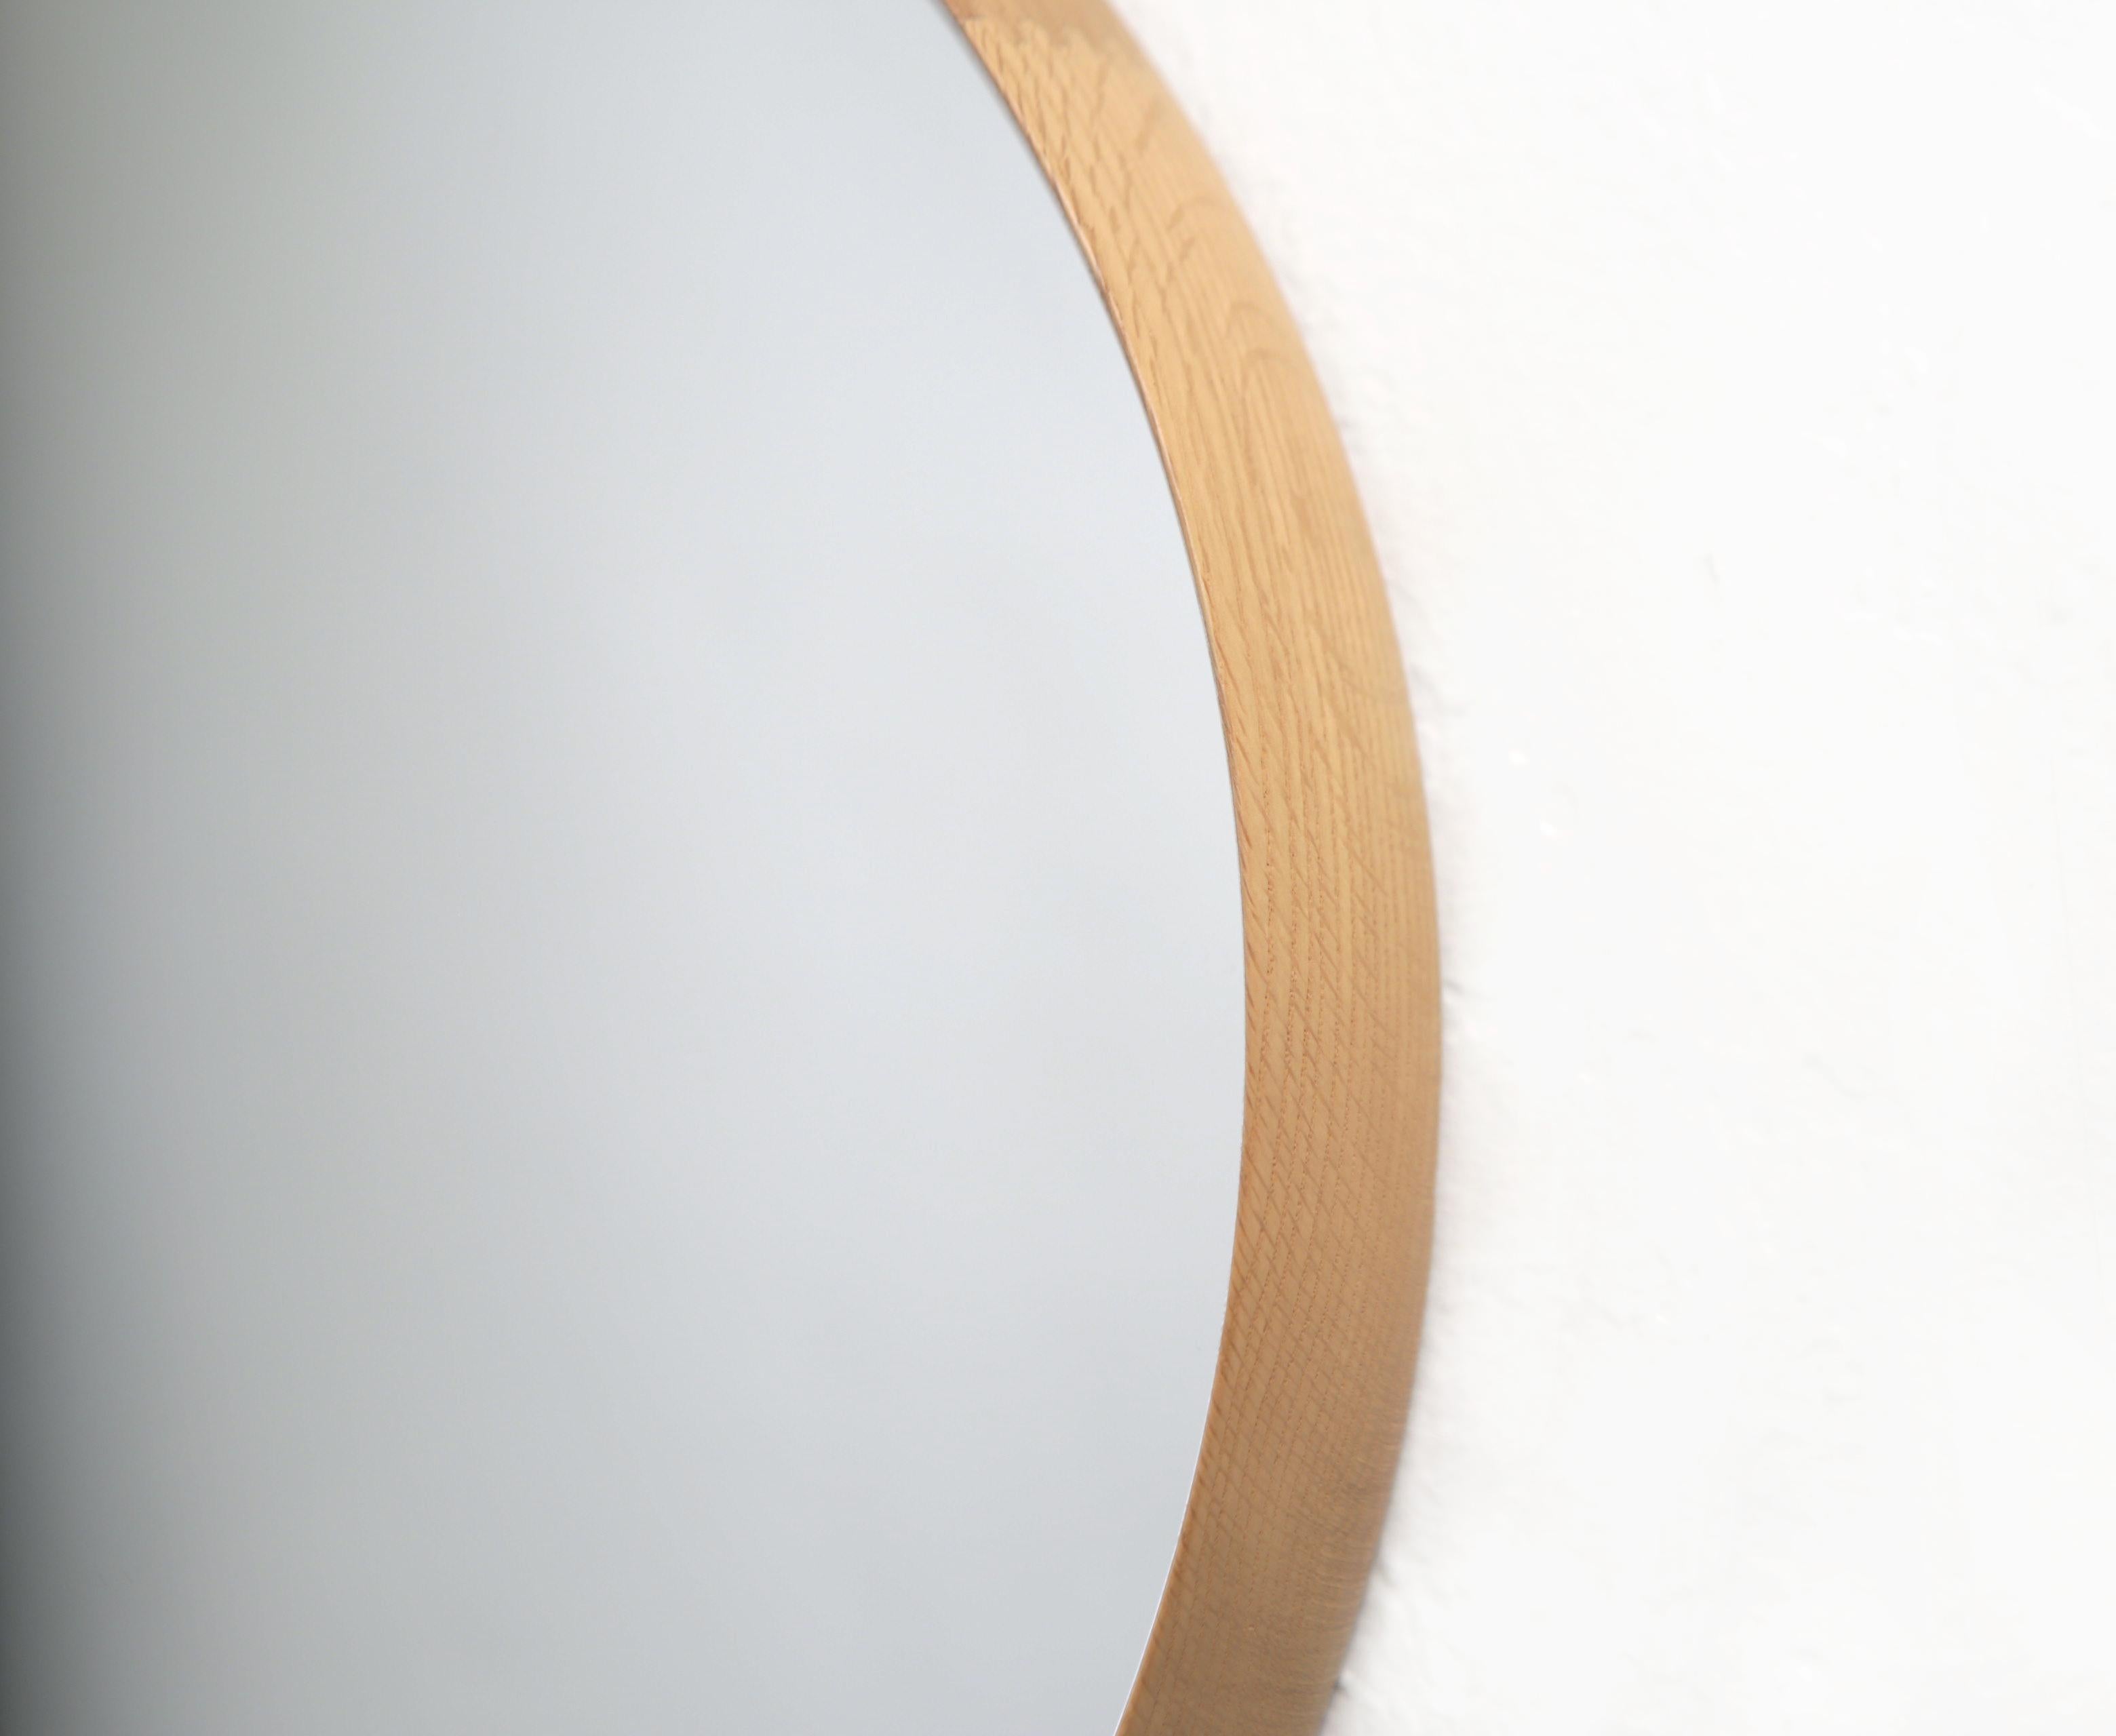 Uno and Osten Kristiansson round oak mirror by Luxus, Sweden, 1960s

This vintage oak mirror is designed by renowned midcentury Swedish designers Uno and Osten Kristiansson for Luxus in the 1960s. It is truly an exquisite and sought after piece.